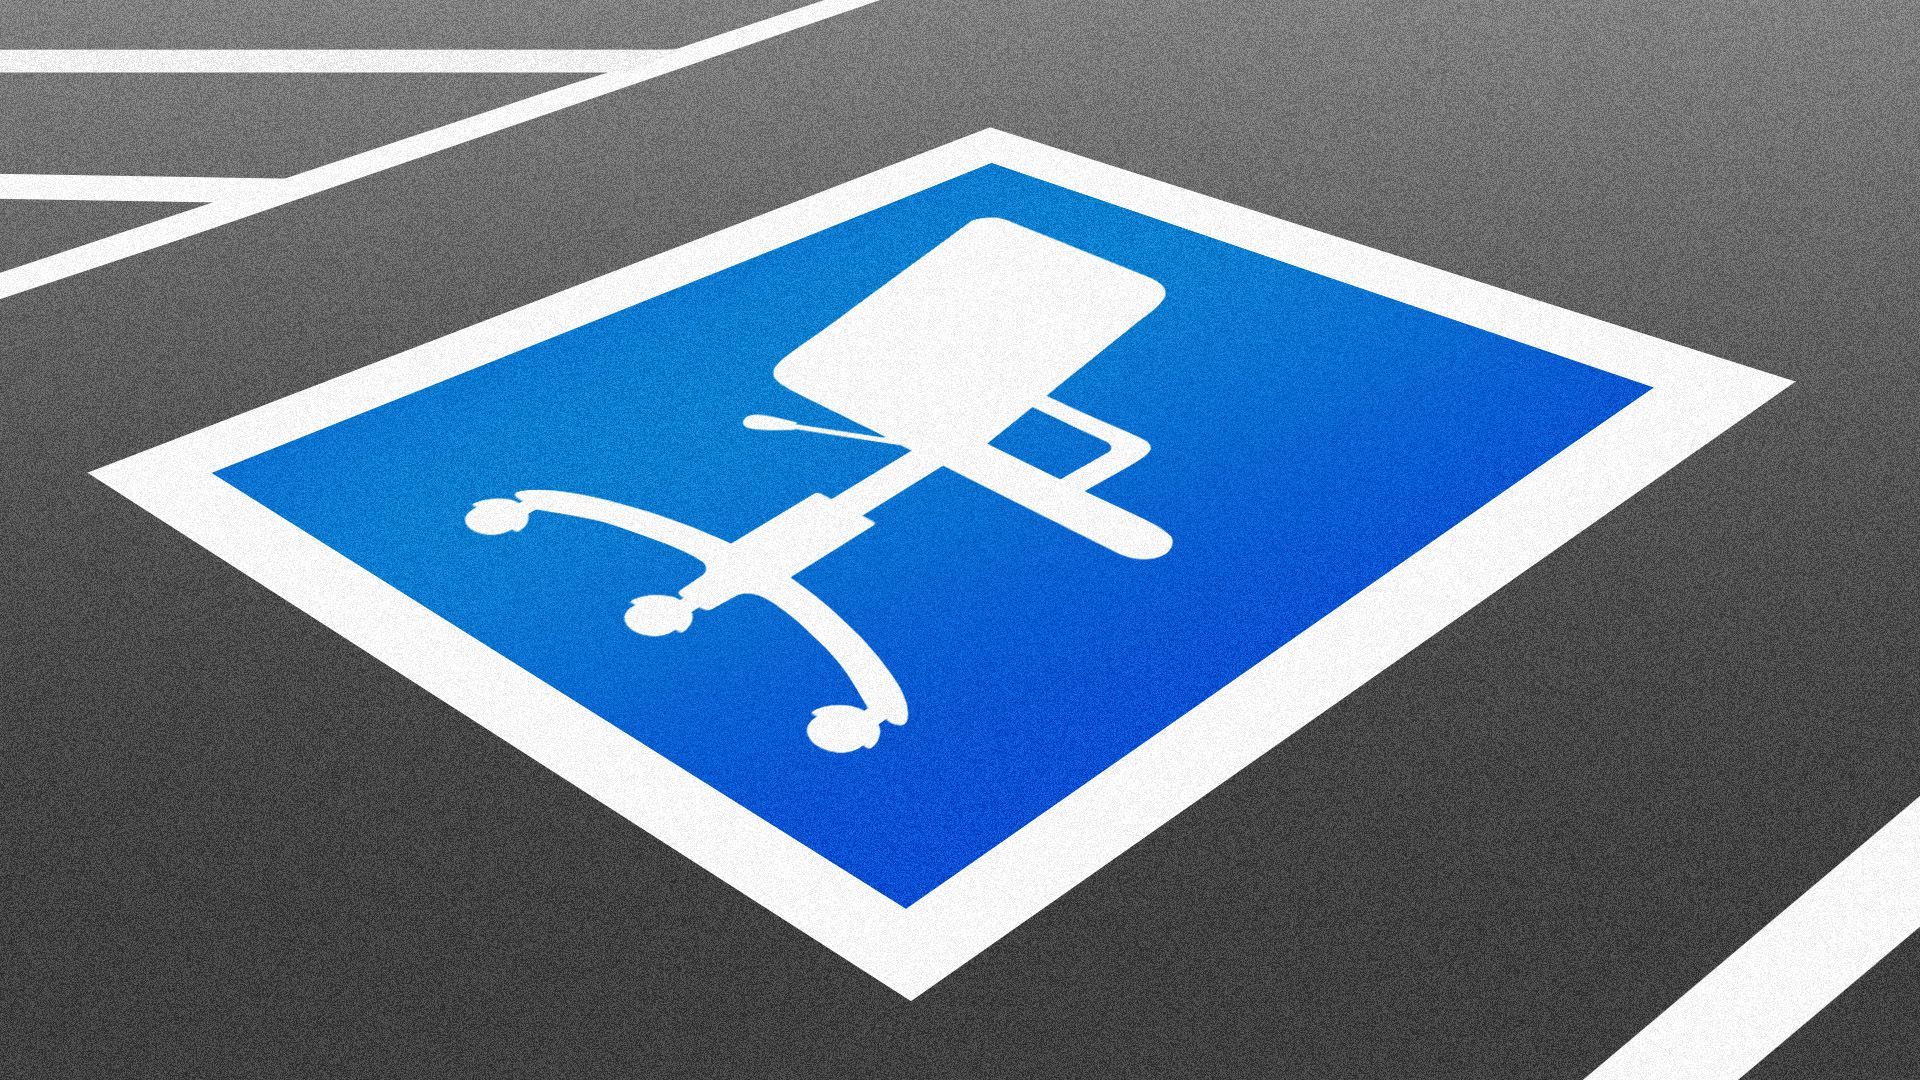 Illustration of an accessible parking space with an office chair in place of a wheelchair icon